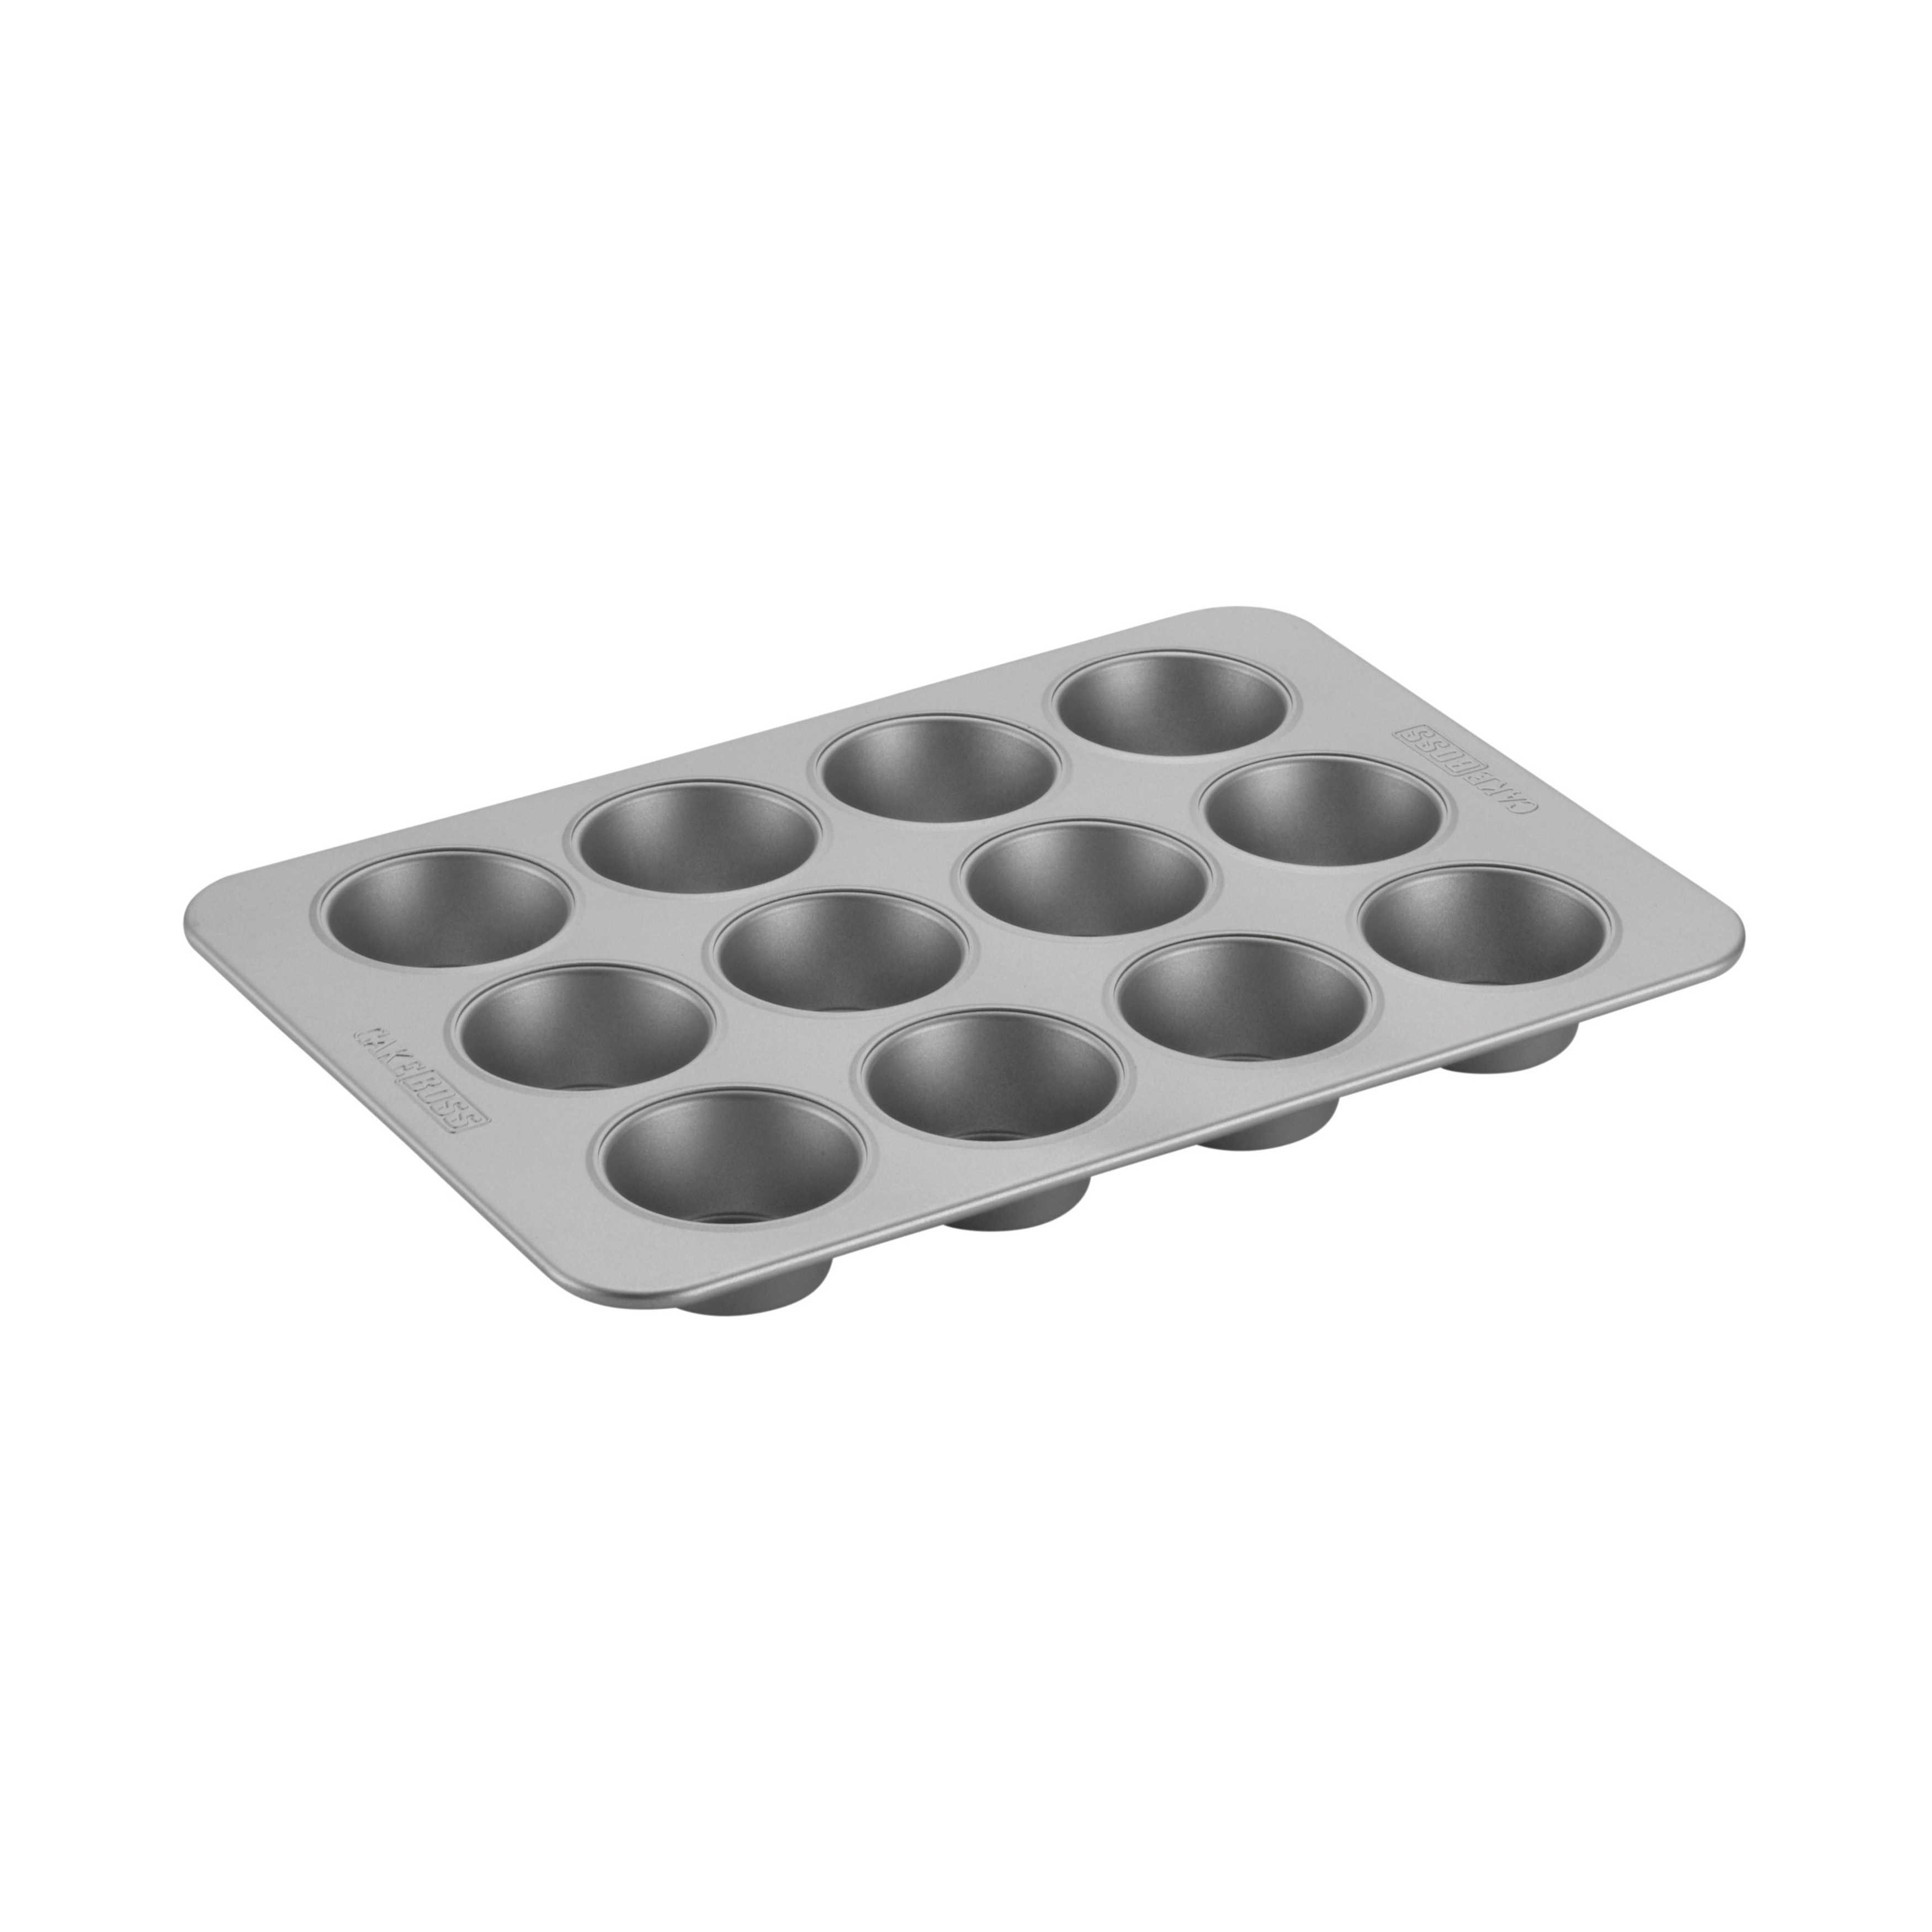 To encounter Silicone Baking Pans Set, 4 Pieces Nonstick Bakeware Set with Baking  Pans, Baking Sheets, Cookie Sheets, Cake Pan with Metal Reinforced Frame  More Strength, Light Grey 